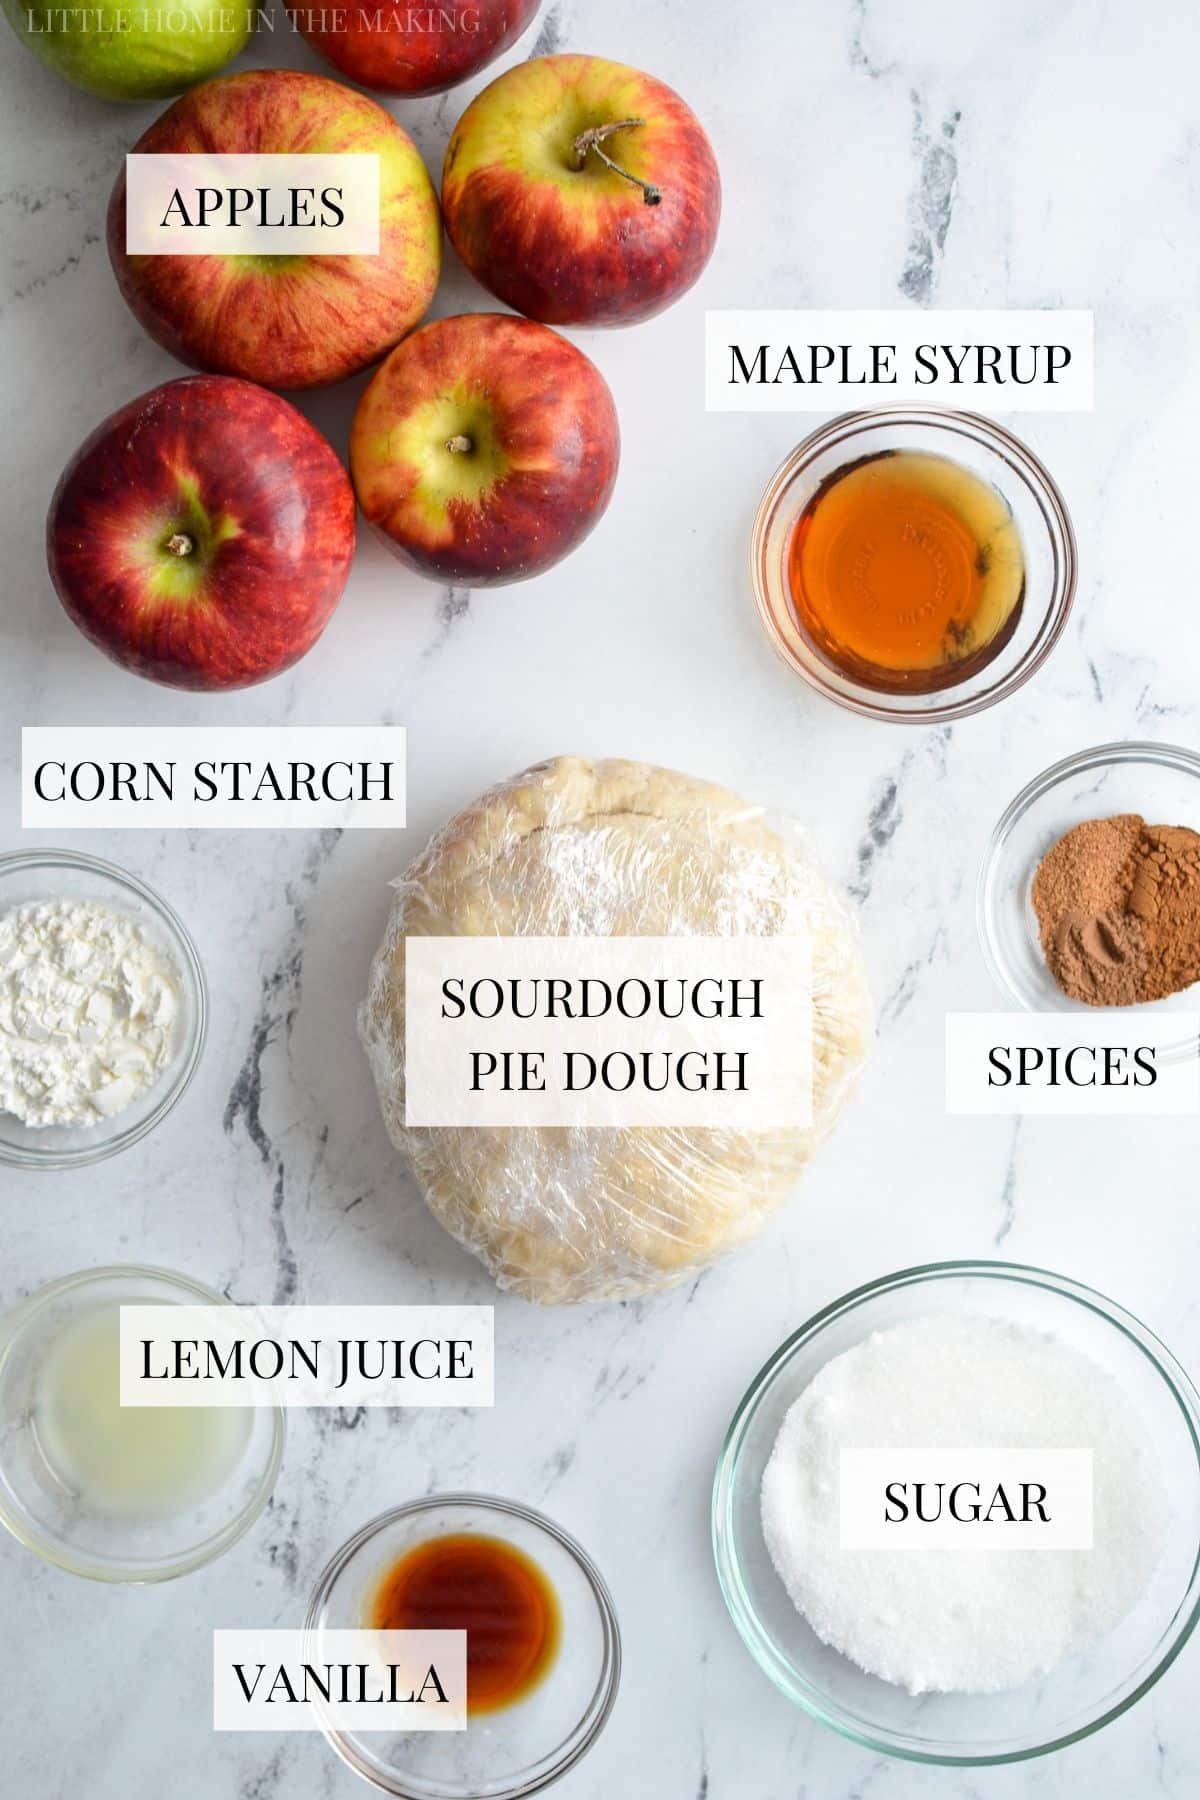 The ingredients needed to make sourdough apple pie, including sourdough pie crust, apples, and maple syrup.